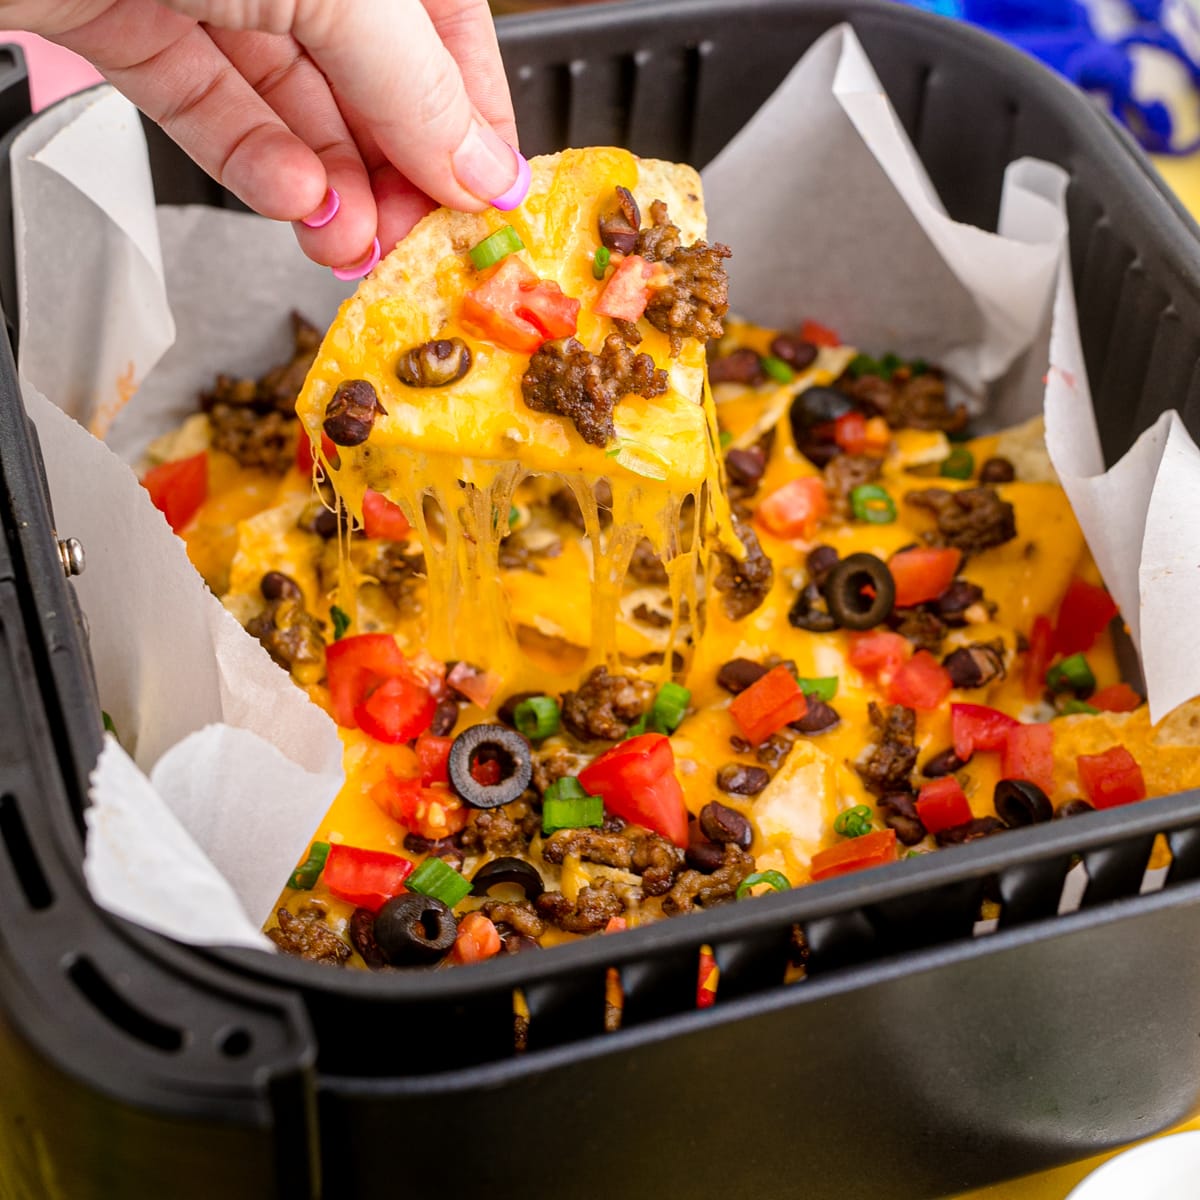 A tortilla chip being with melty cheese and toppings being lifted out an air fryer full of nachos.